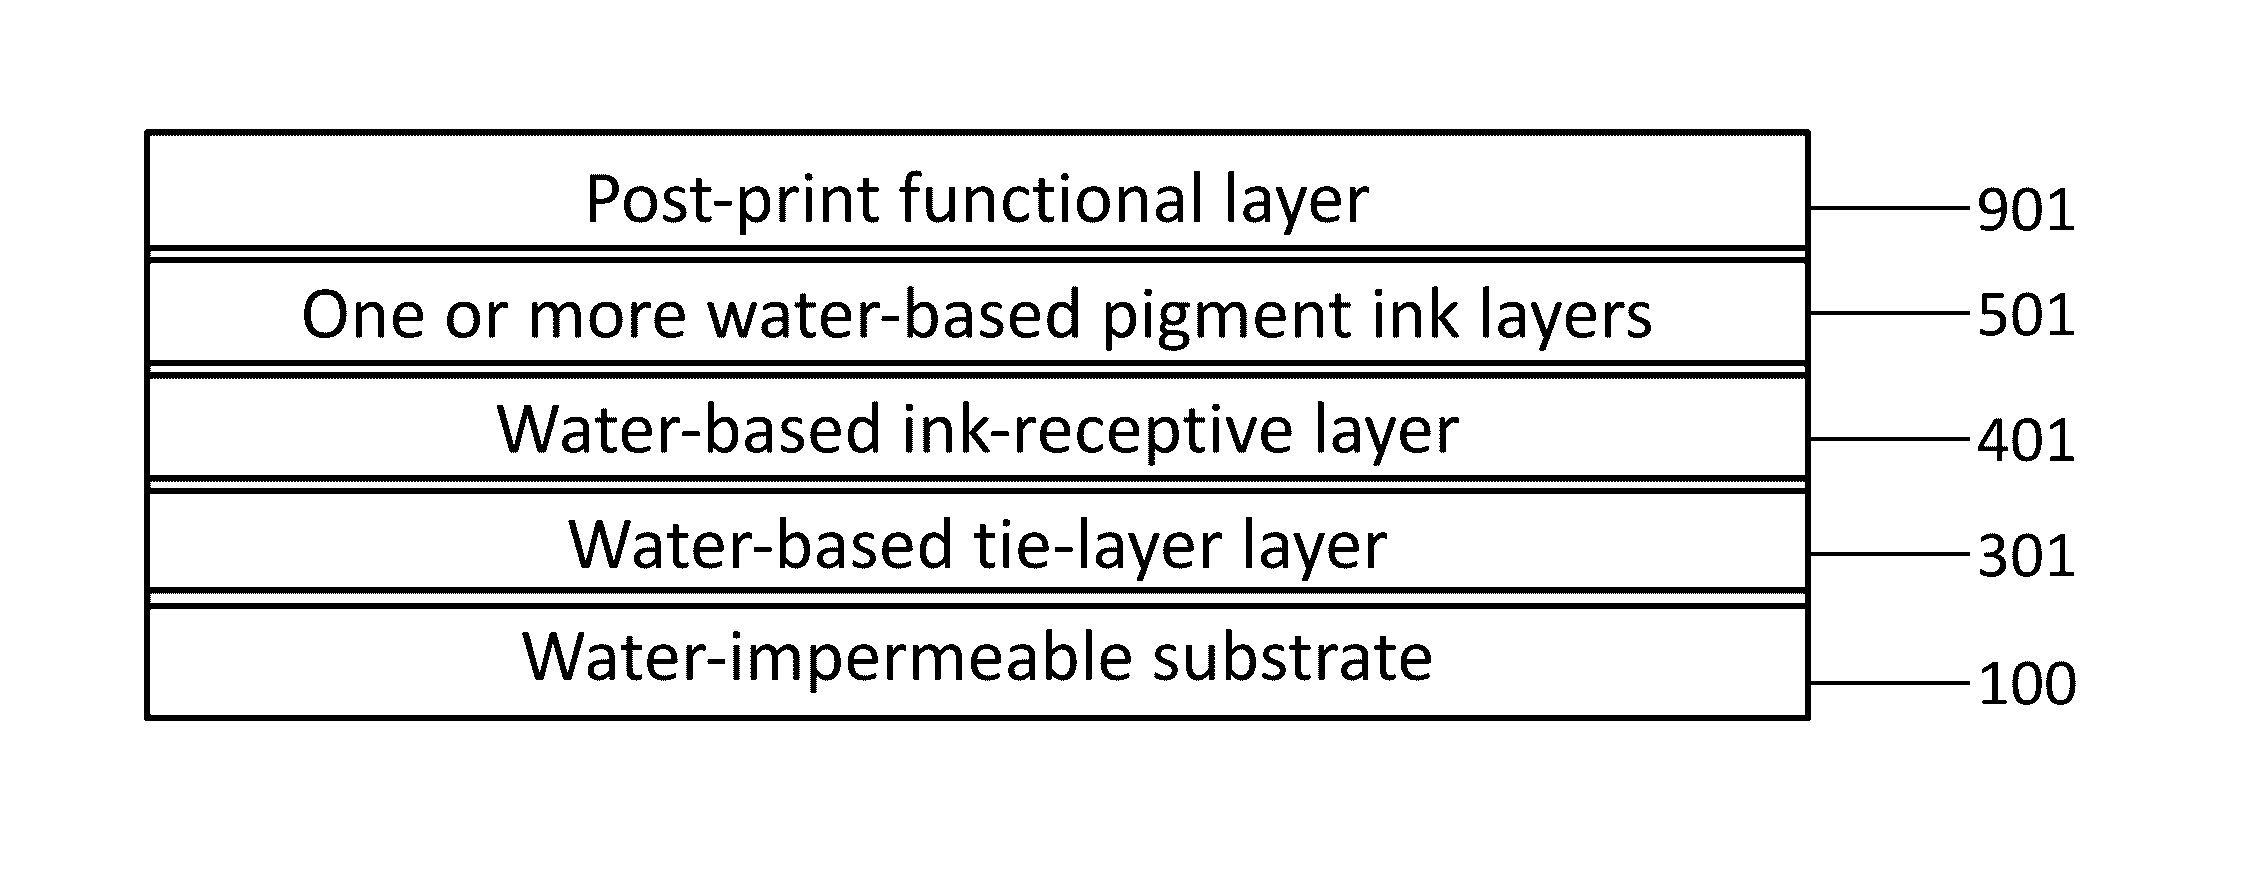 Multilayered structure with water-impermeable substrate